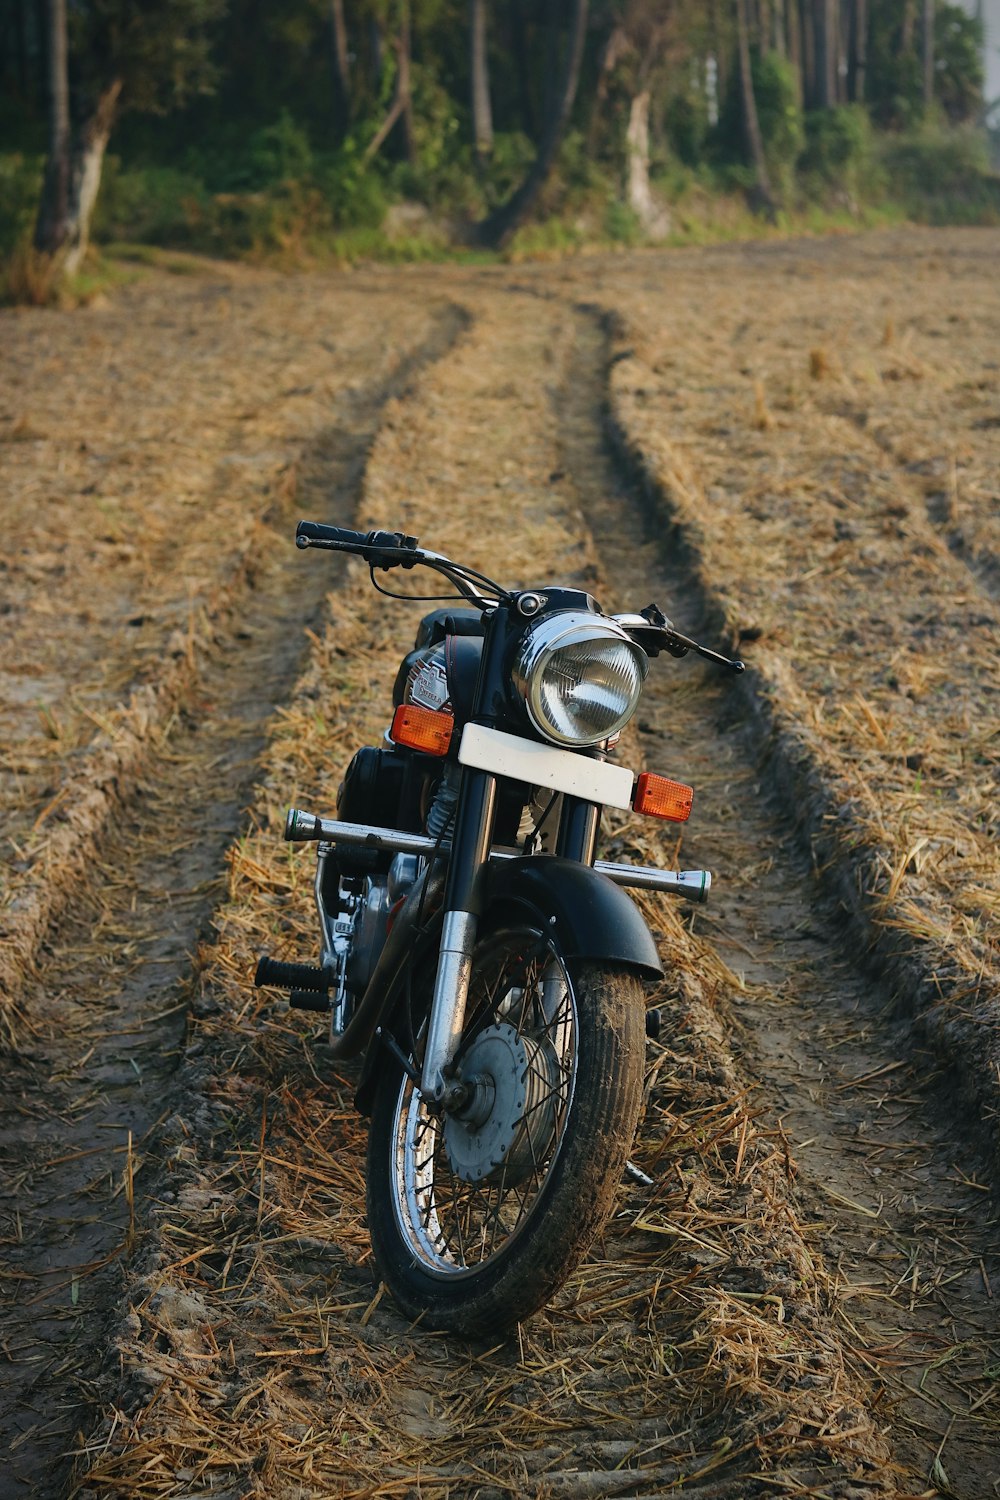 a motorcycle parked on a dirt road in the middle of a field